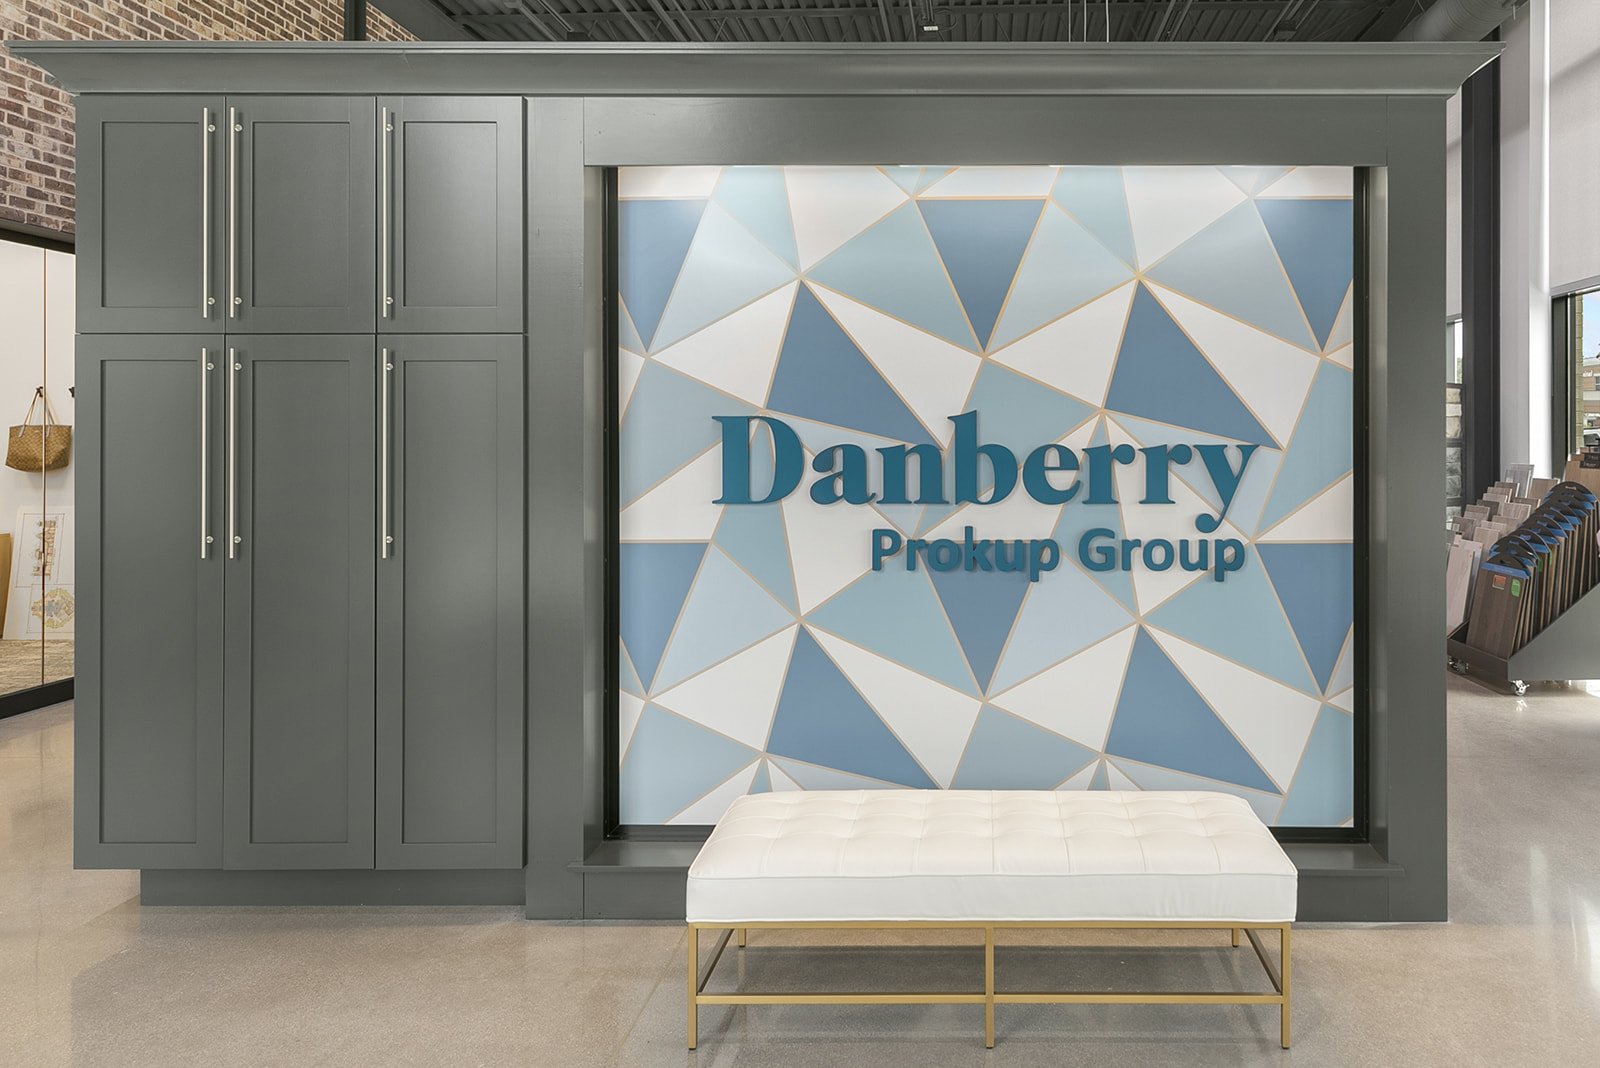 Danberry welcome sign